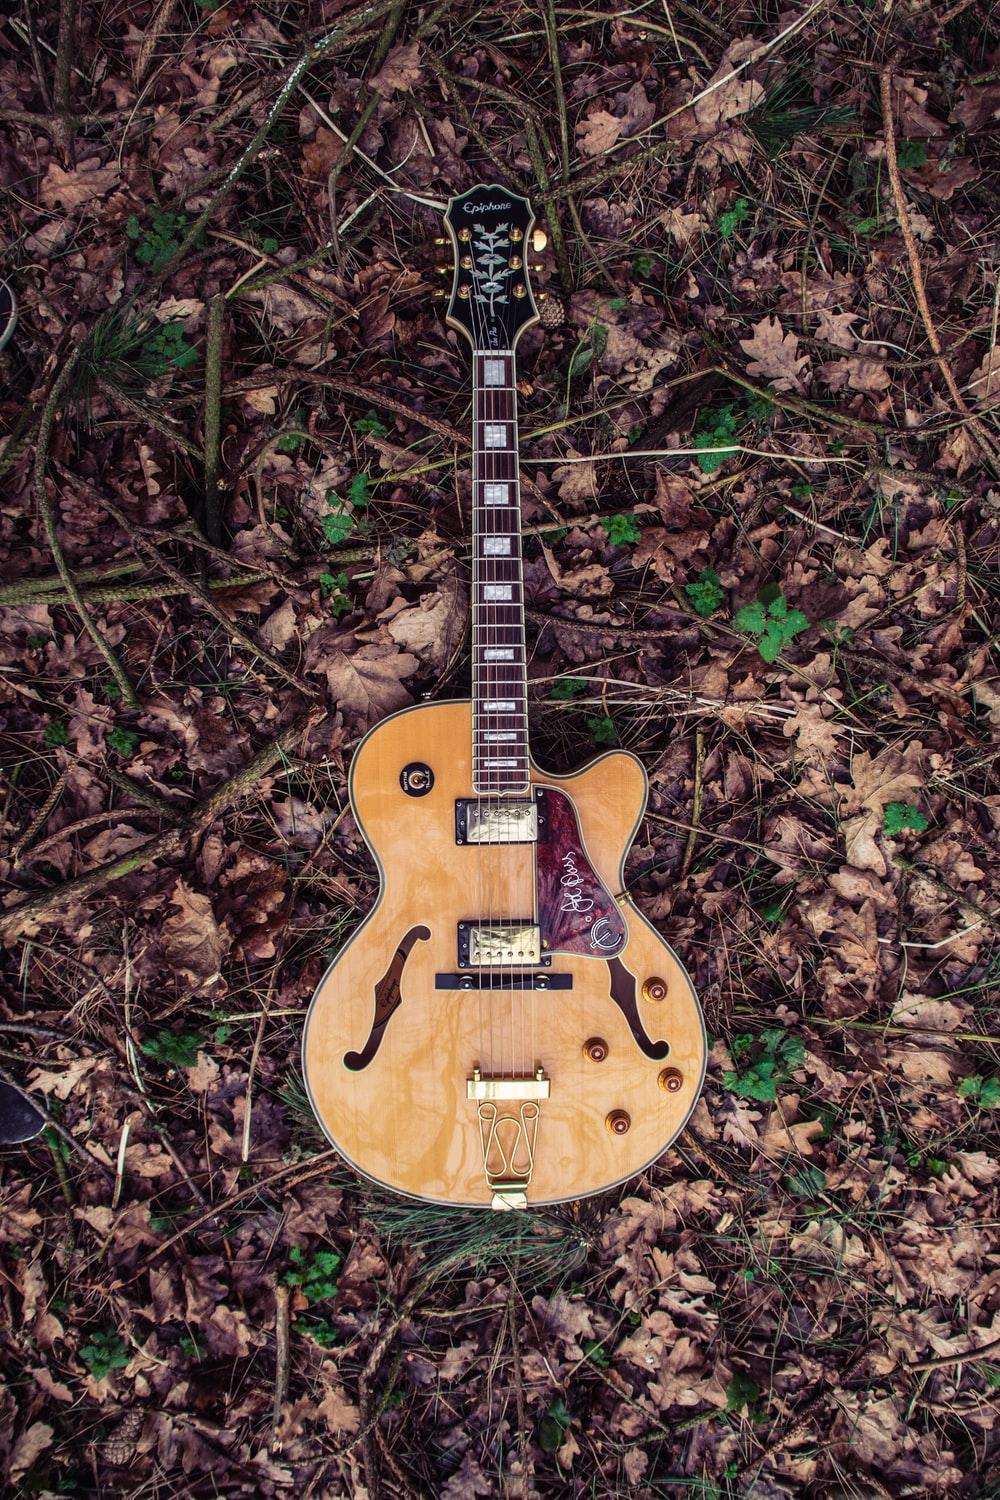 Was shooting my guitar in a forest fo